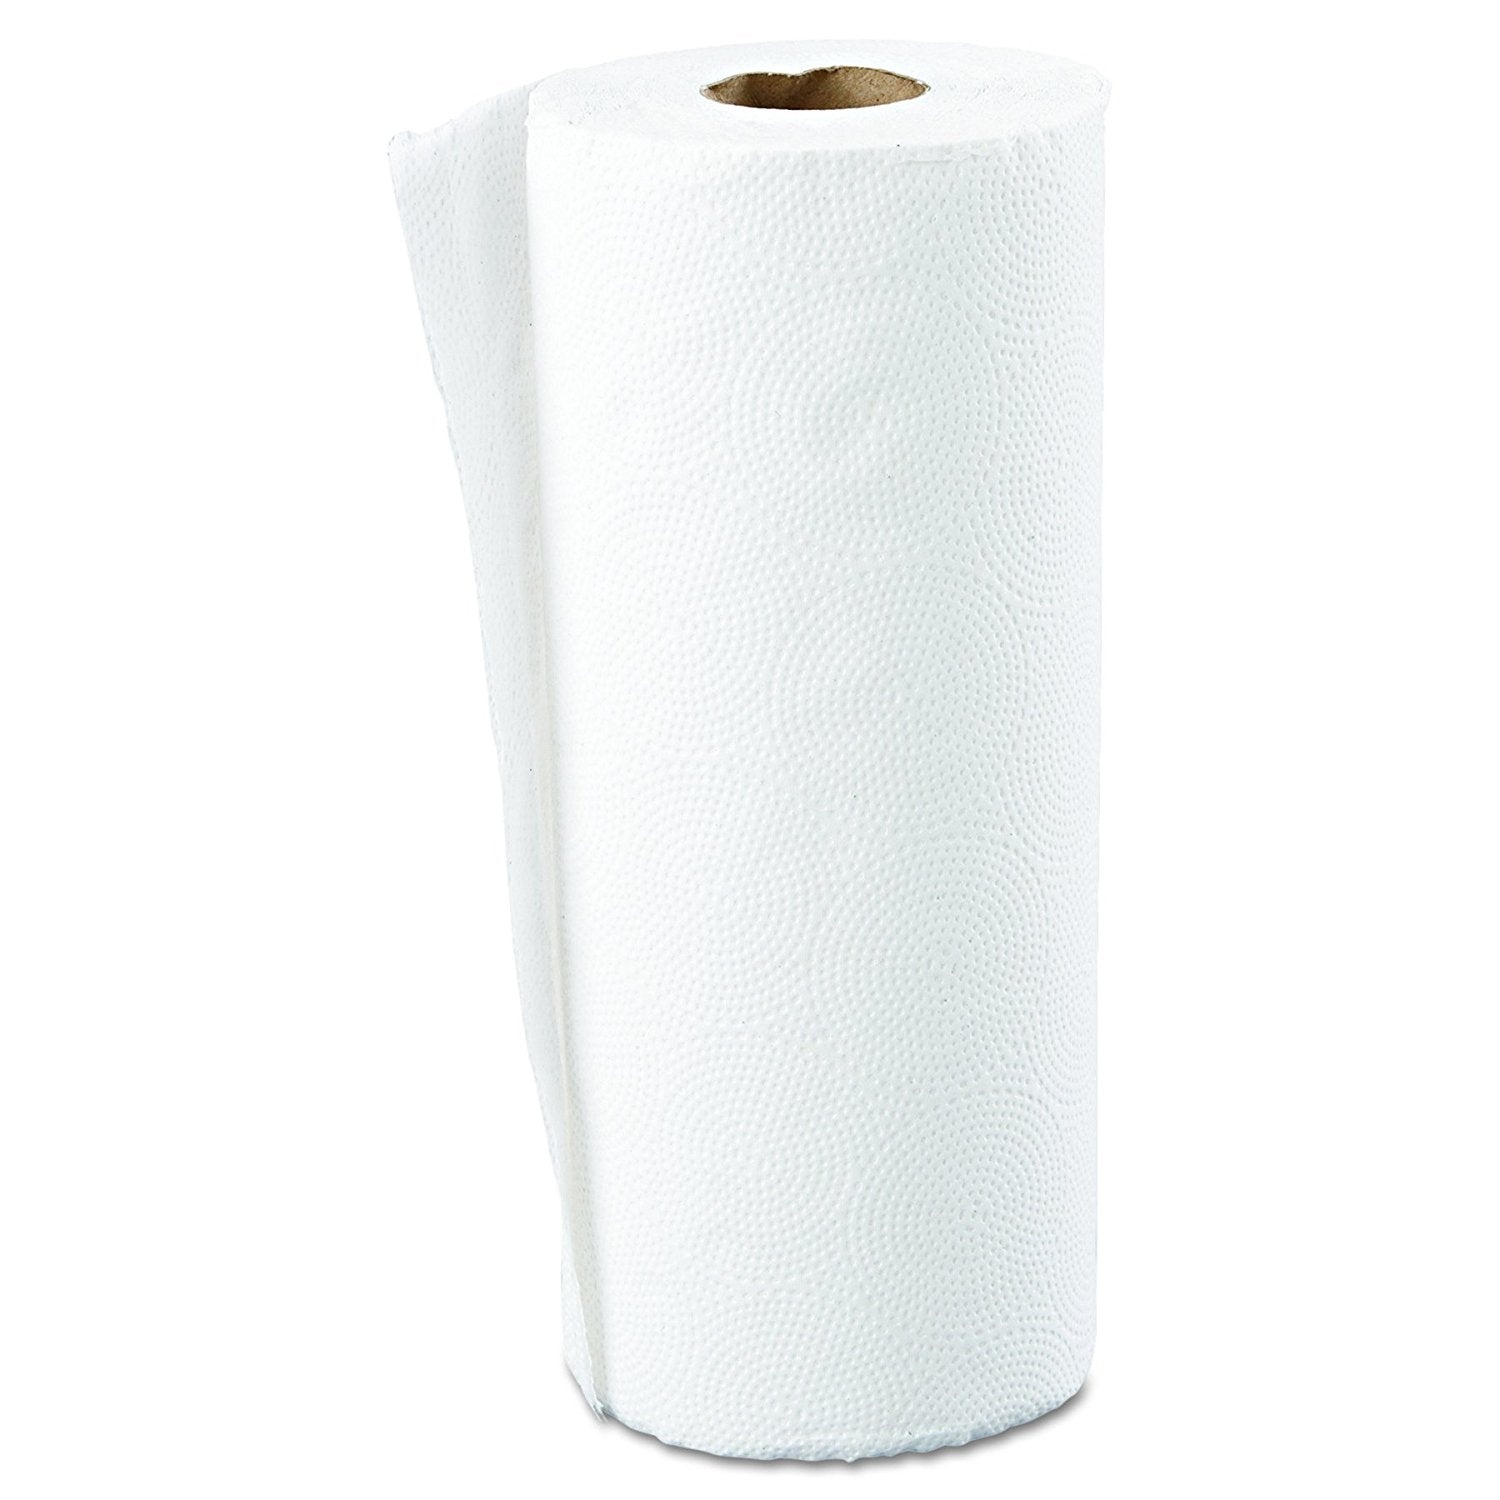 Paper towel roll - 2ply (56 sheets) - i-Spa 